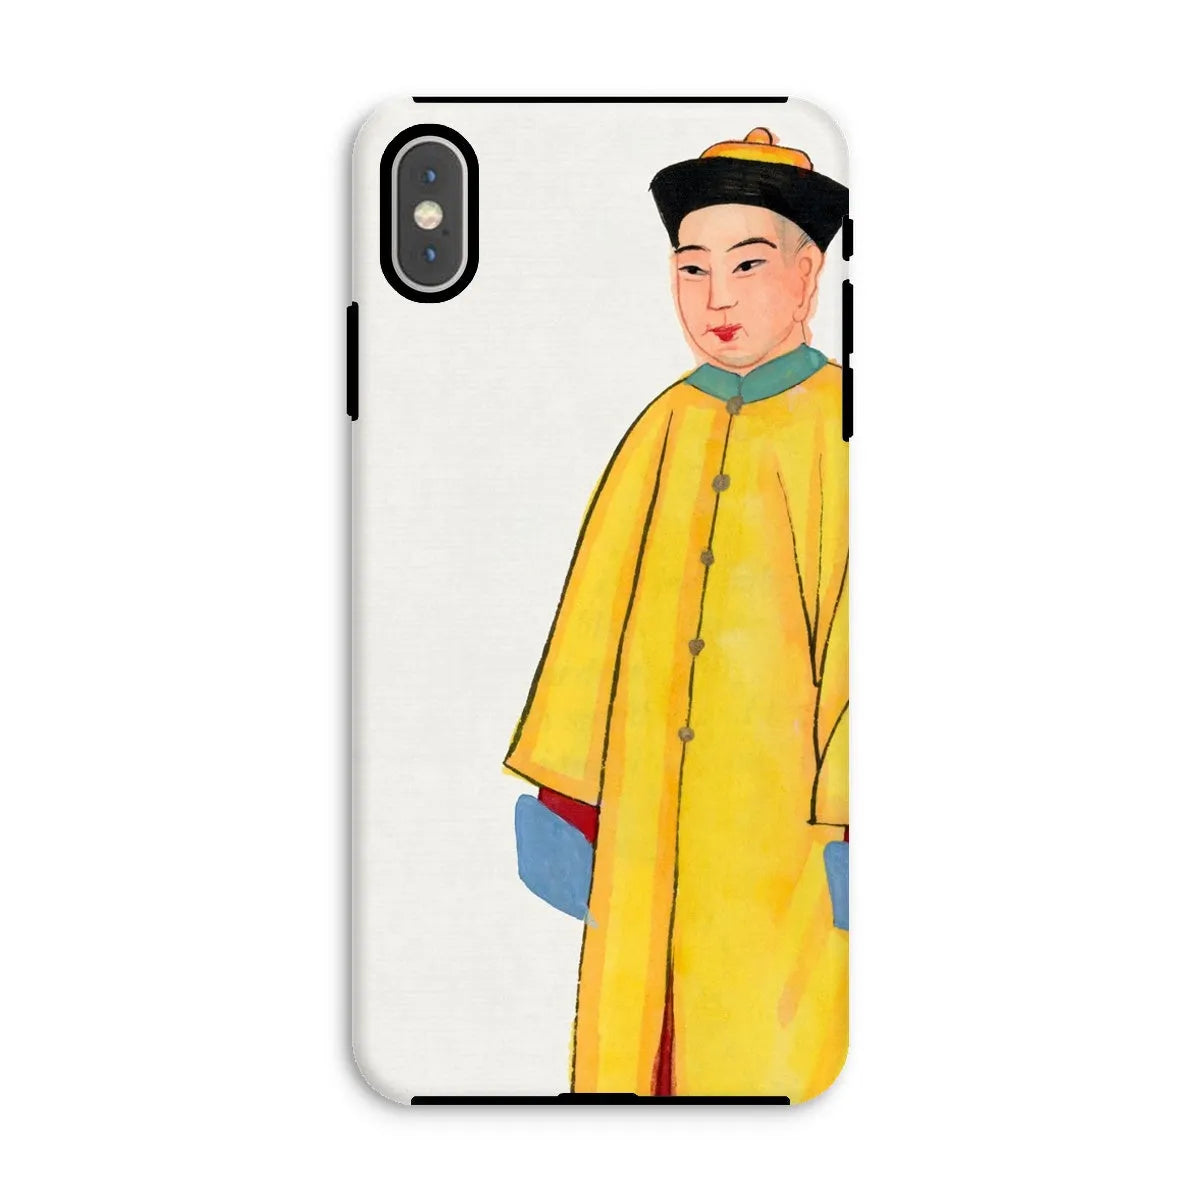 Priest In Yellow Robes - Chinese Aesthetic Art Phone Case - Iphone Xs Max / Matte - Mobile Phone Cases - Aesthetic Art